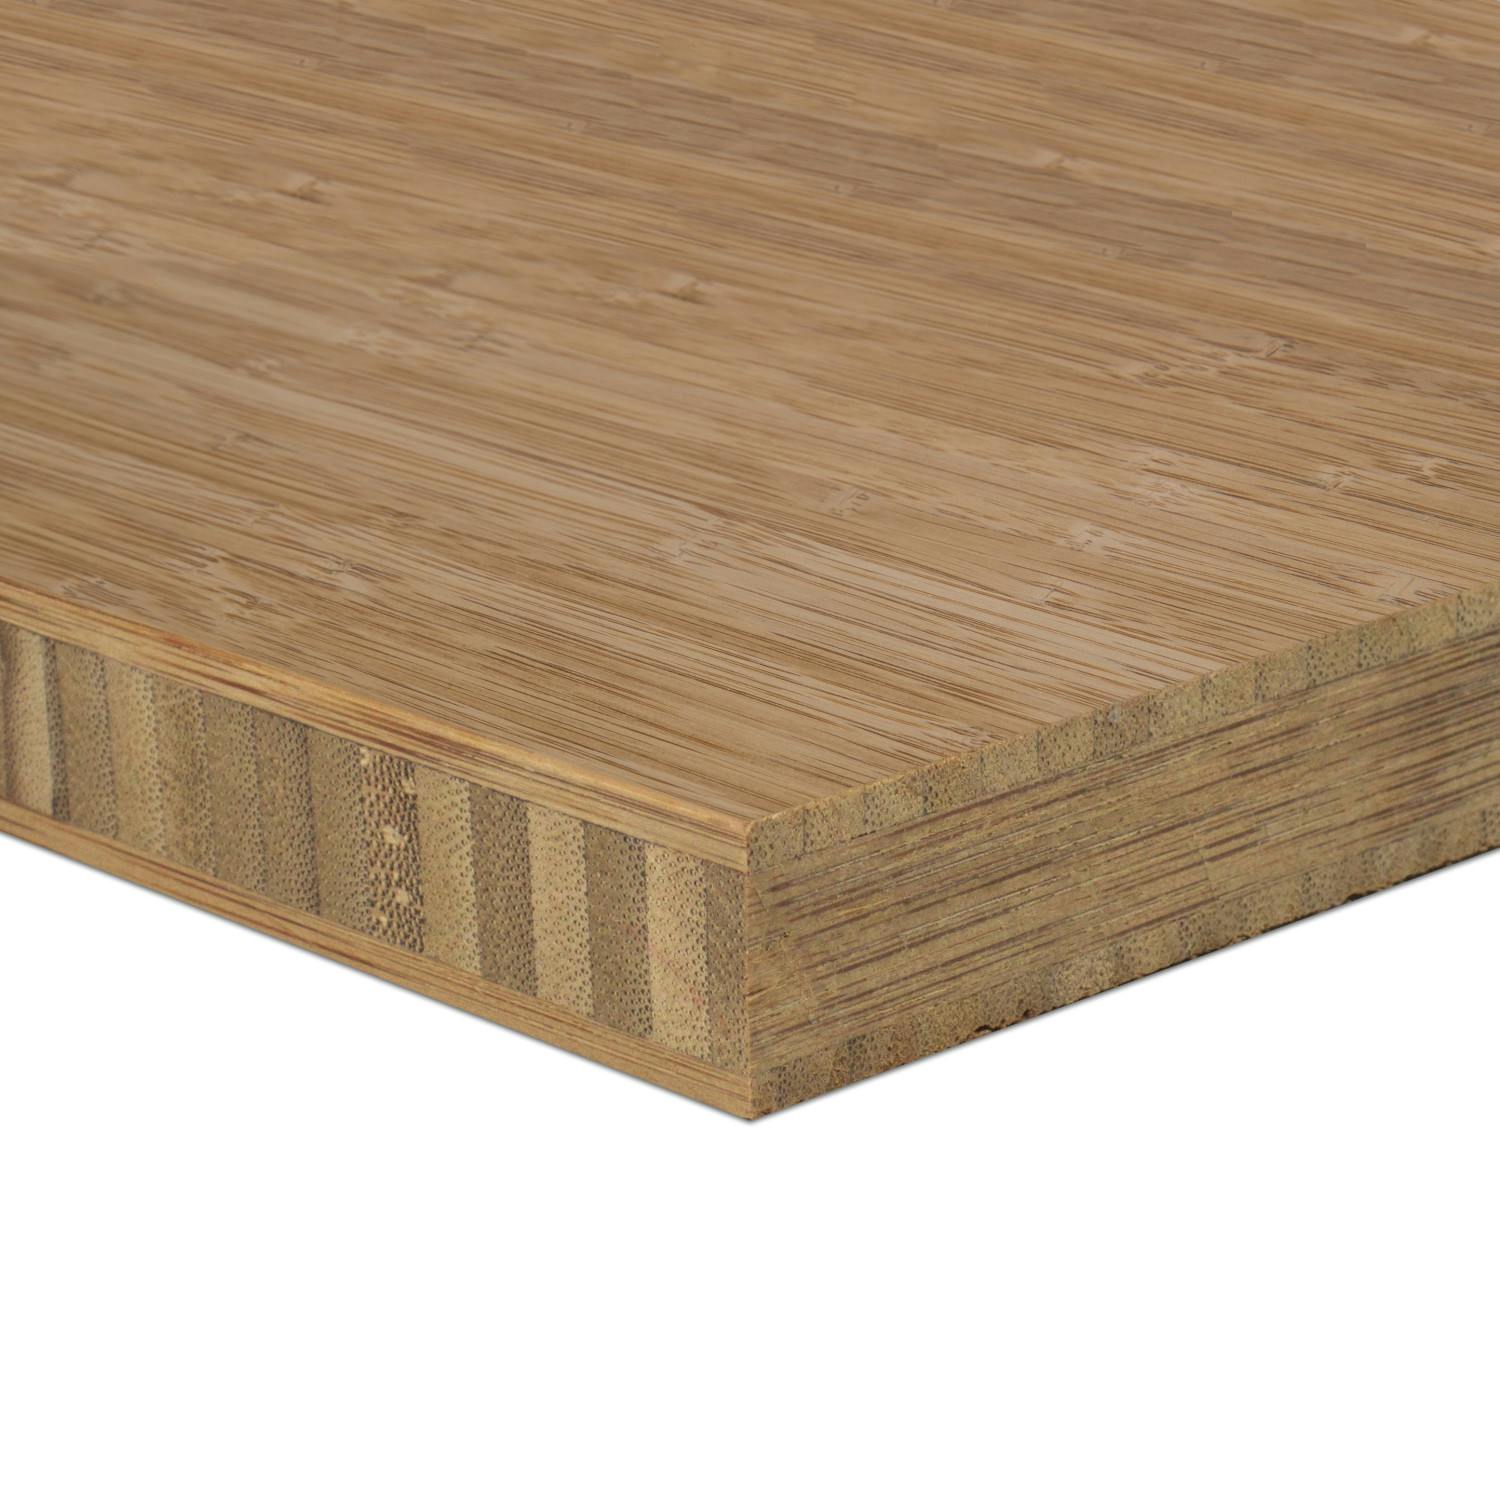 3/4 Inch Carbonized Vertical Bamboo Plywood - 3 PLY